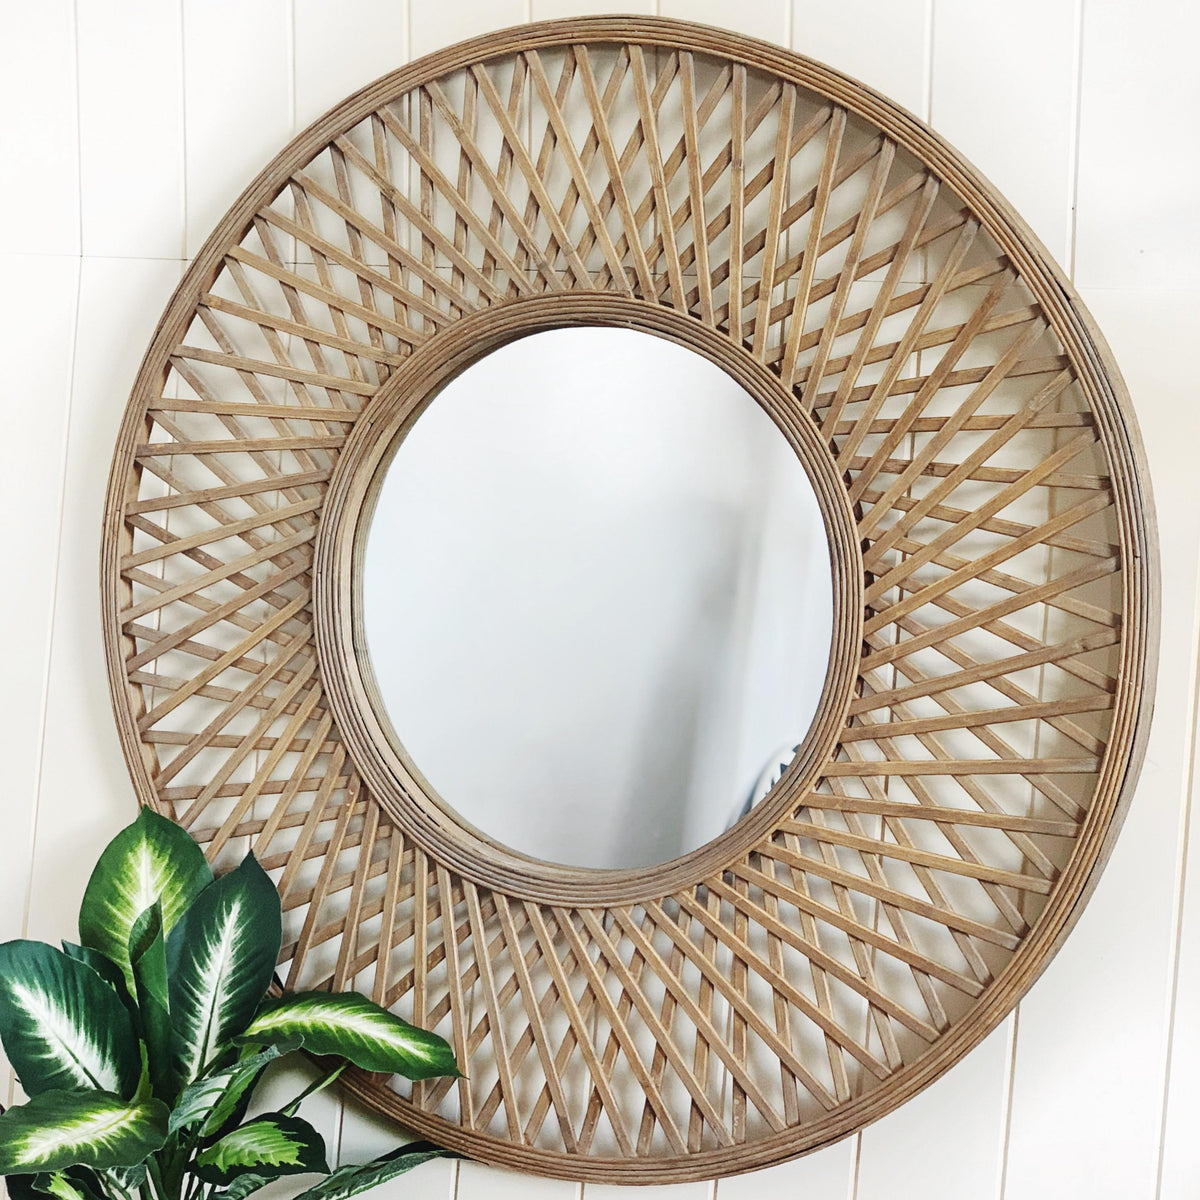 Mirrors - Rattan - Natural Oasis Round Rattan Mirror - 79cm |Bliss Gifts &amp; Homewares - Unit 8, 259 Princes Hwy Ulladulla - Shop Online &amp; In store - 0427795959, 44541523 - Australia wide shipping 